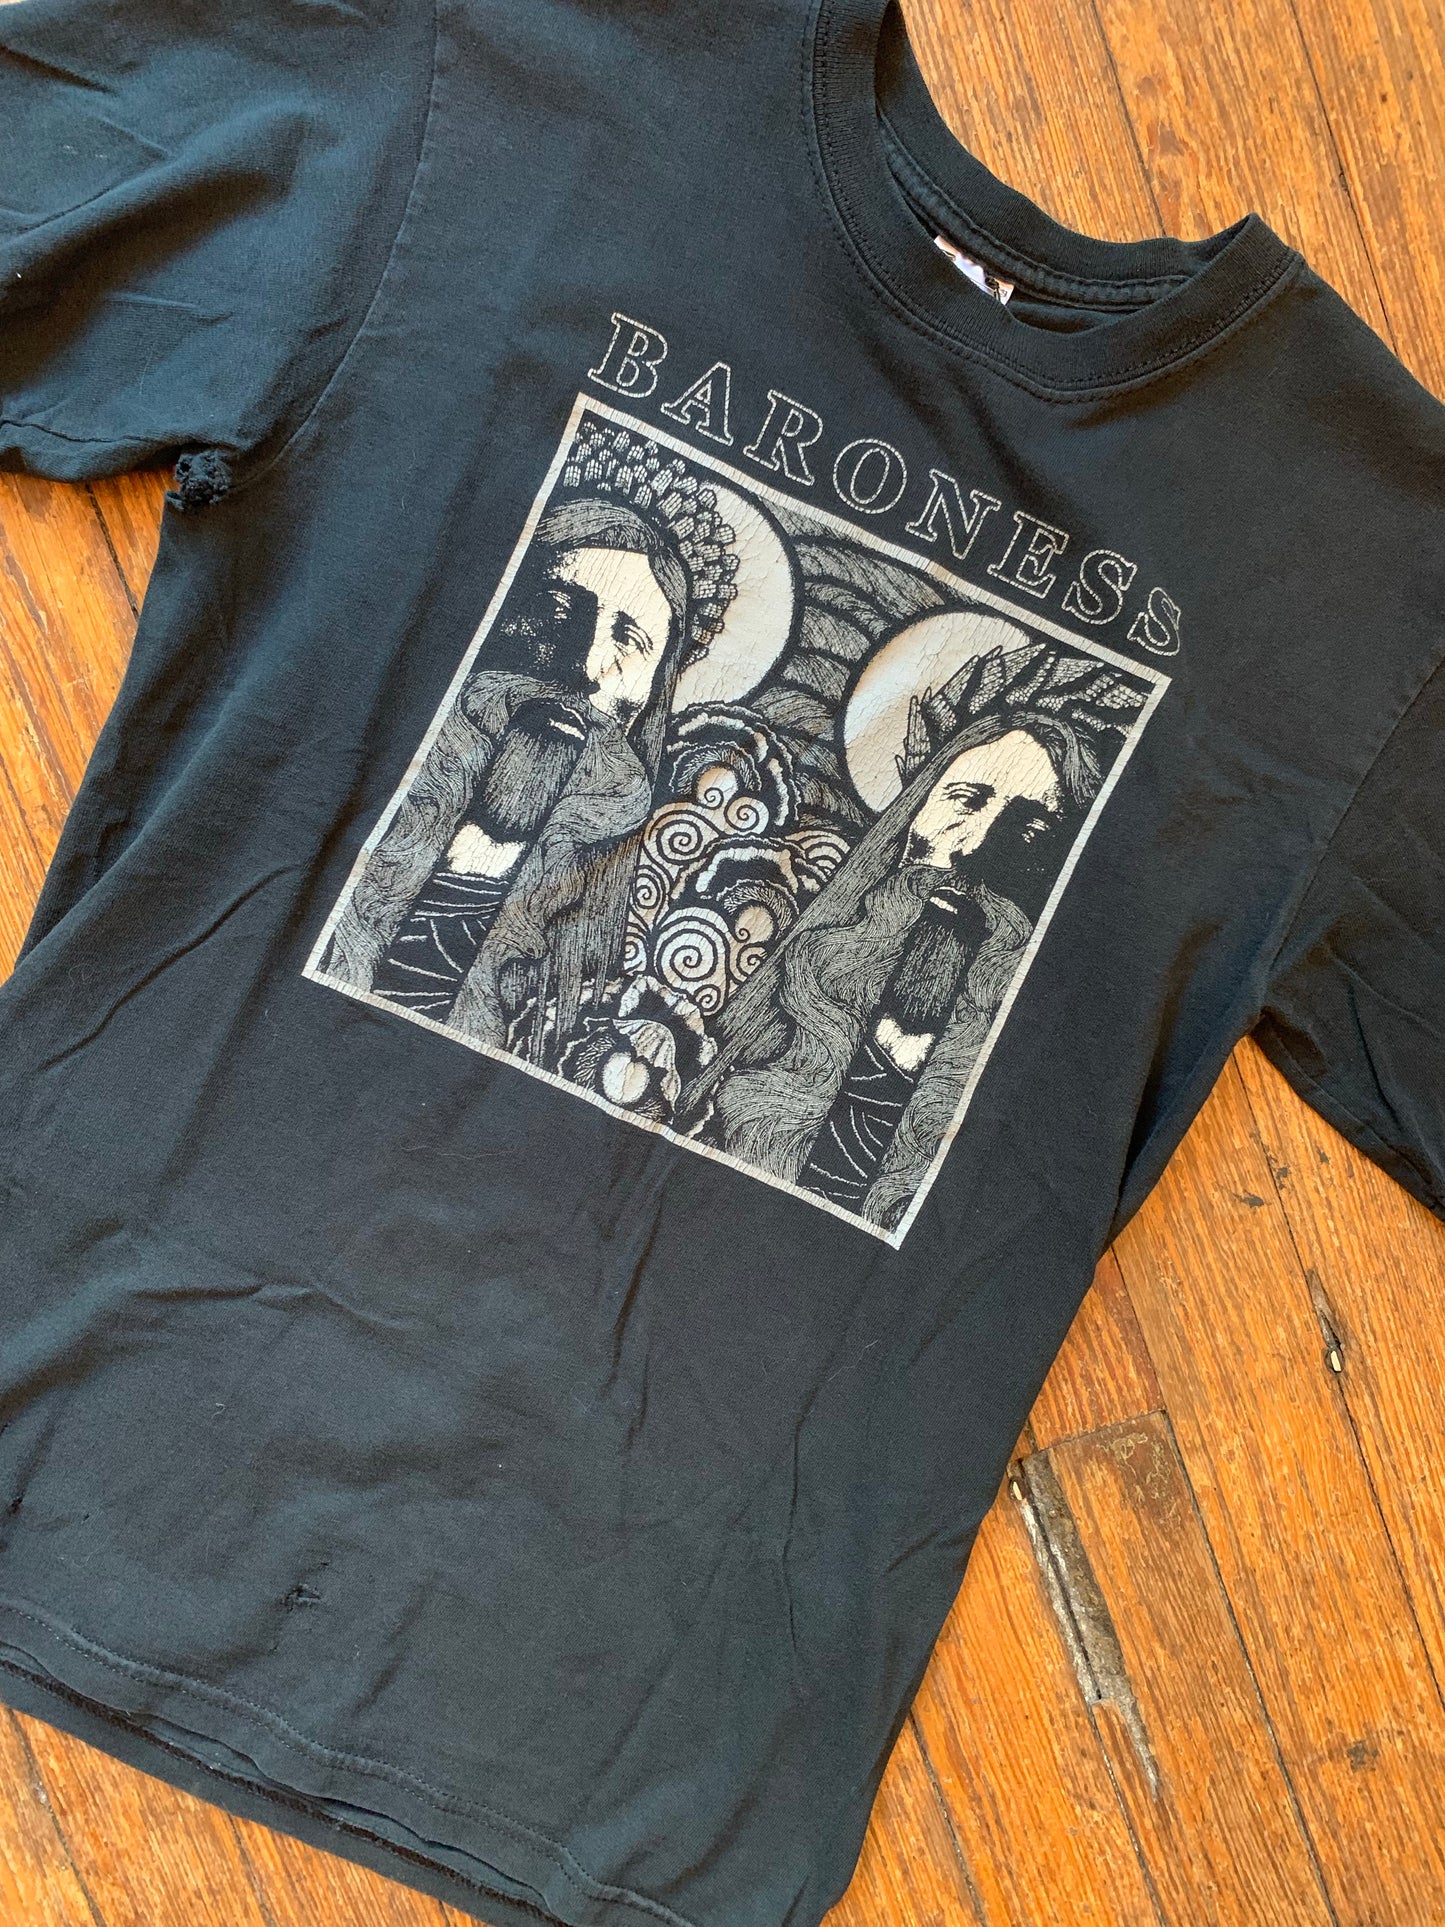 2005 Baroness ‘Second’ T-shirt